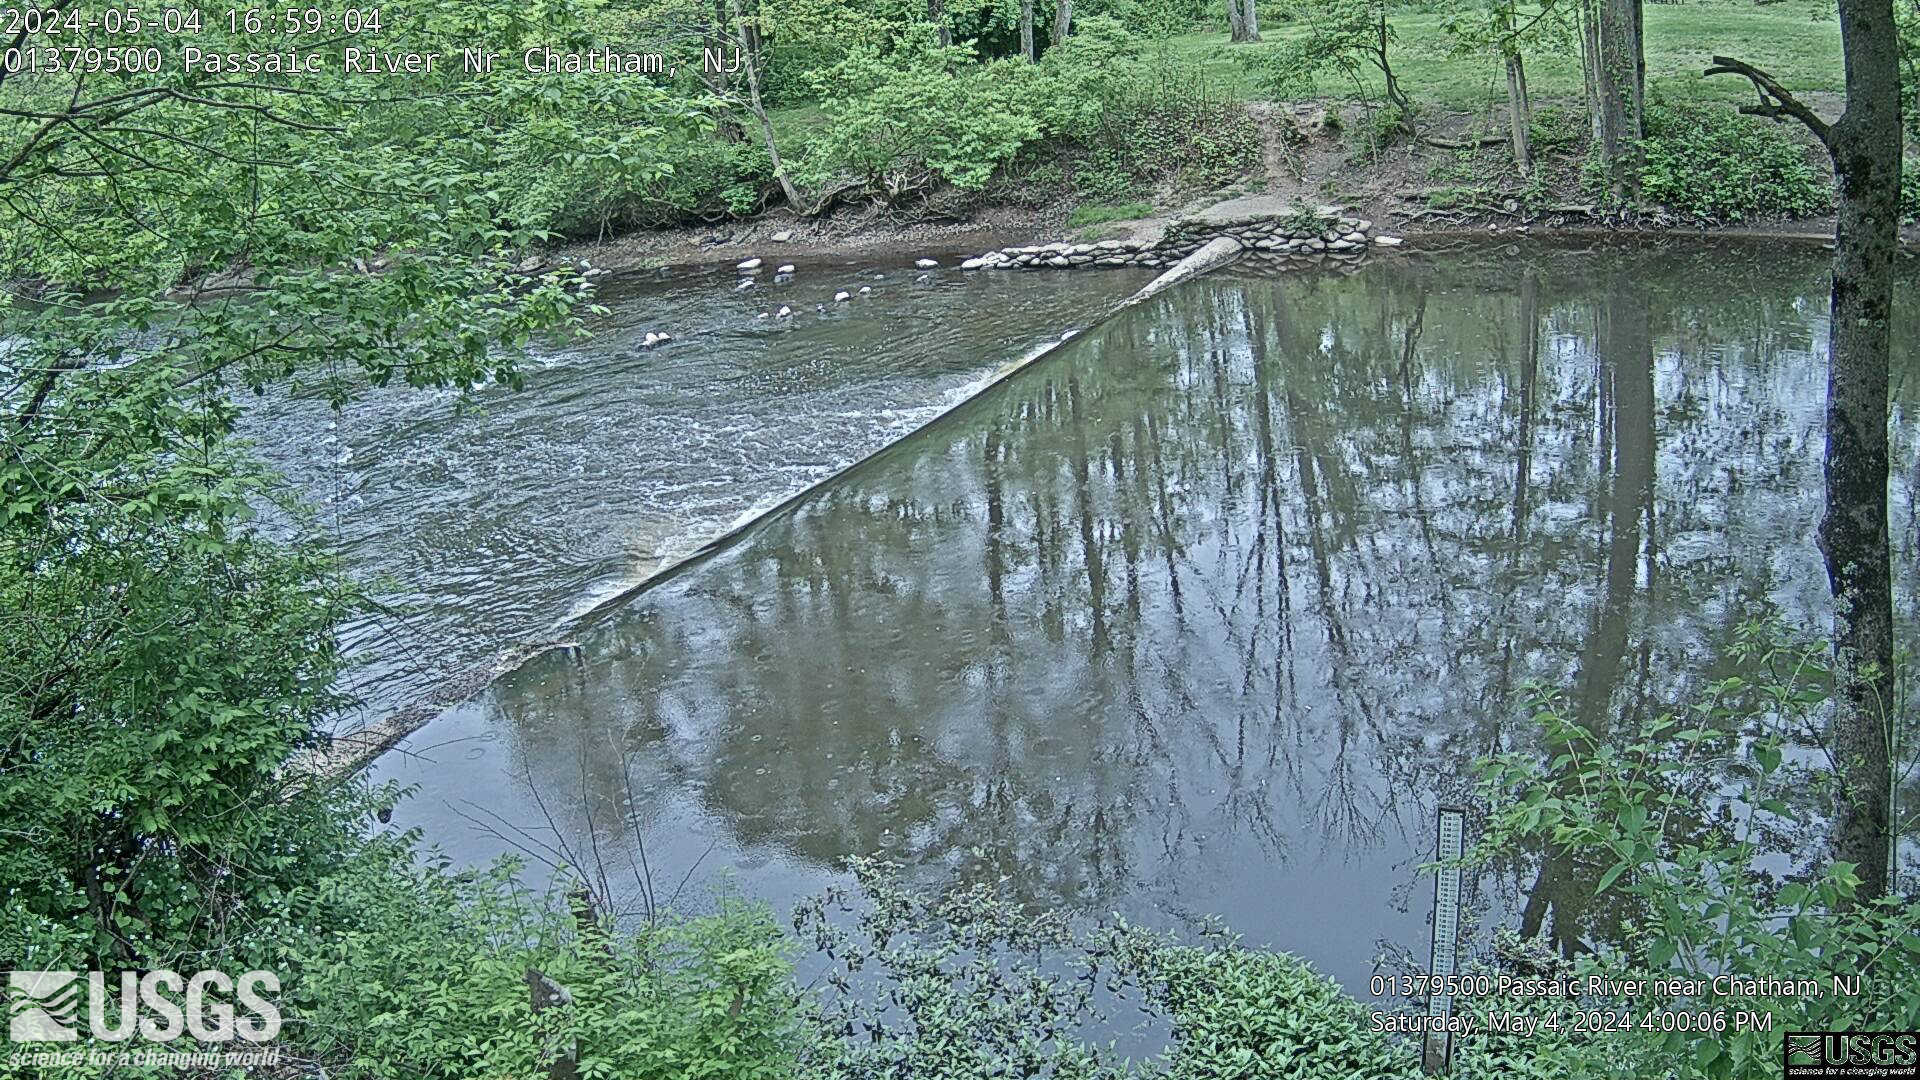 View of the weir in the Passaic River 